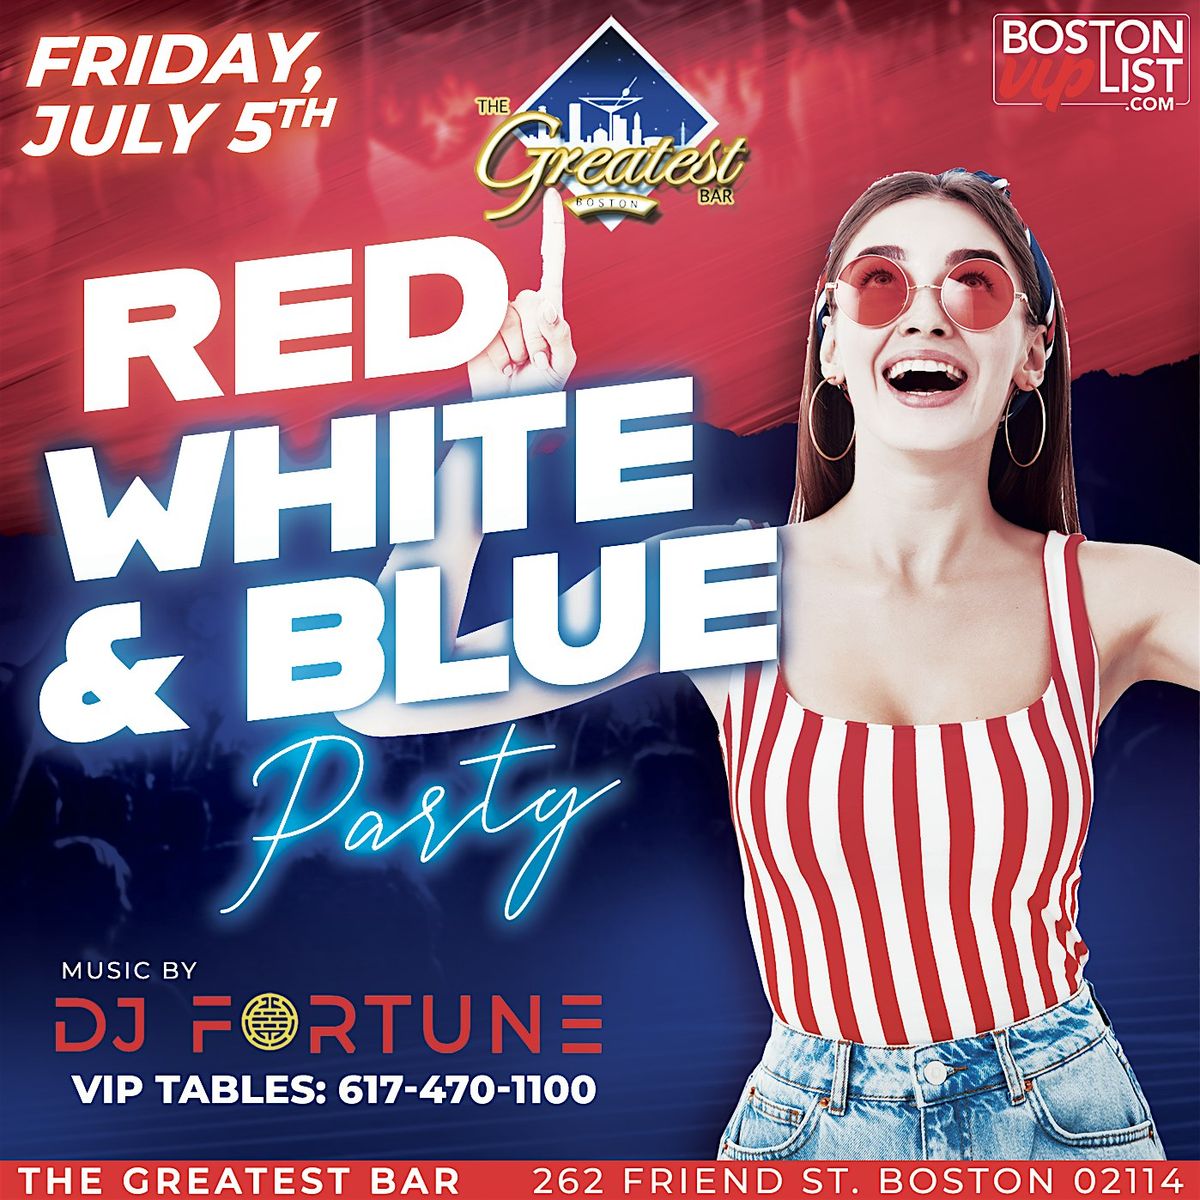 Red White and Blue Party @ The Greatest Bar